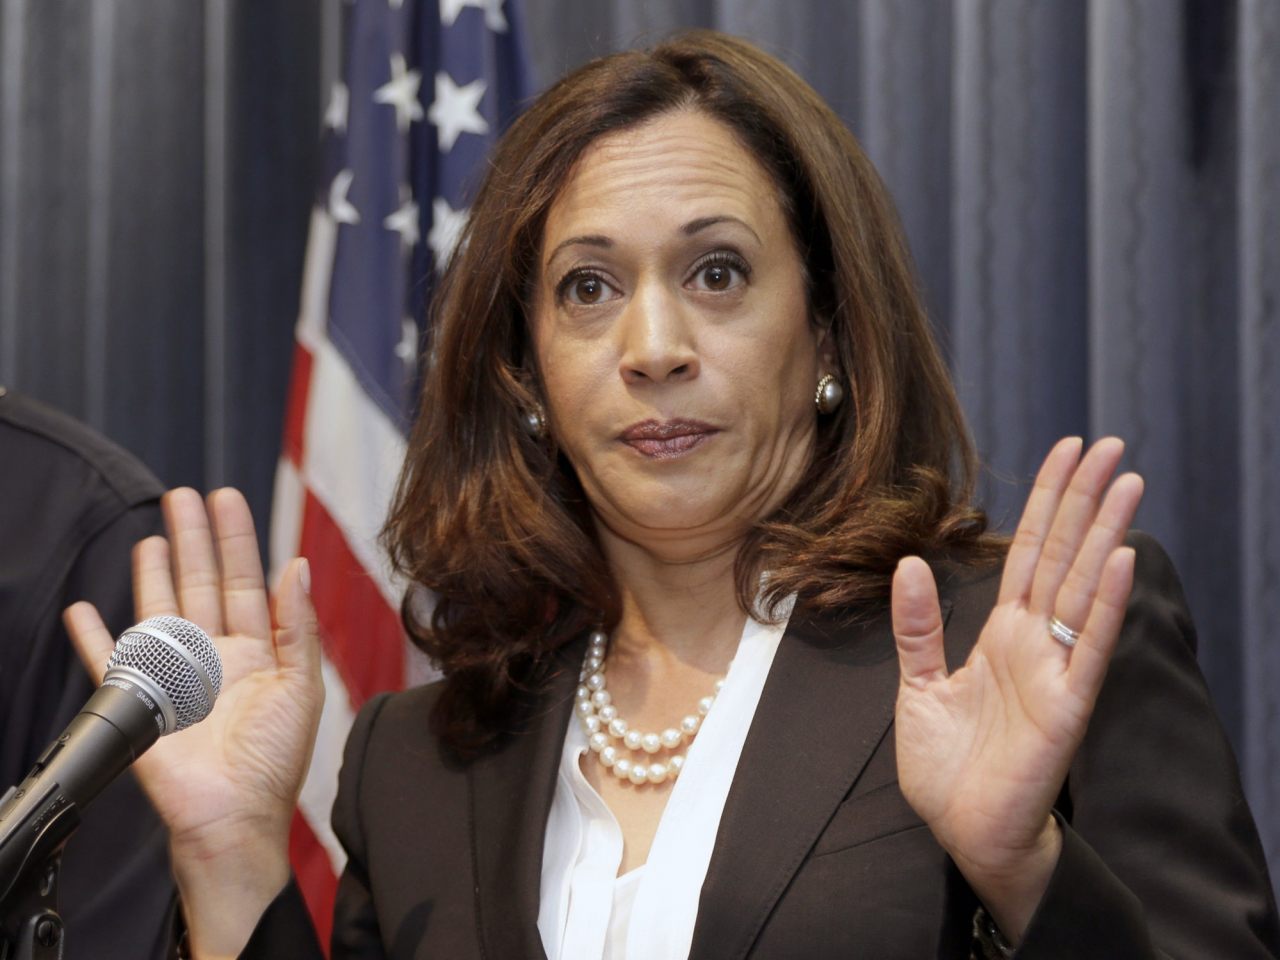 Image: Kamala Harris praises the rioting and looting, calls it “marching” and states she has “great optimism”